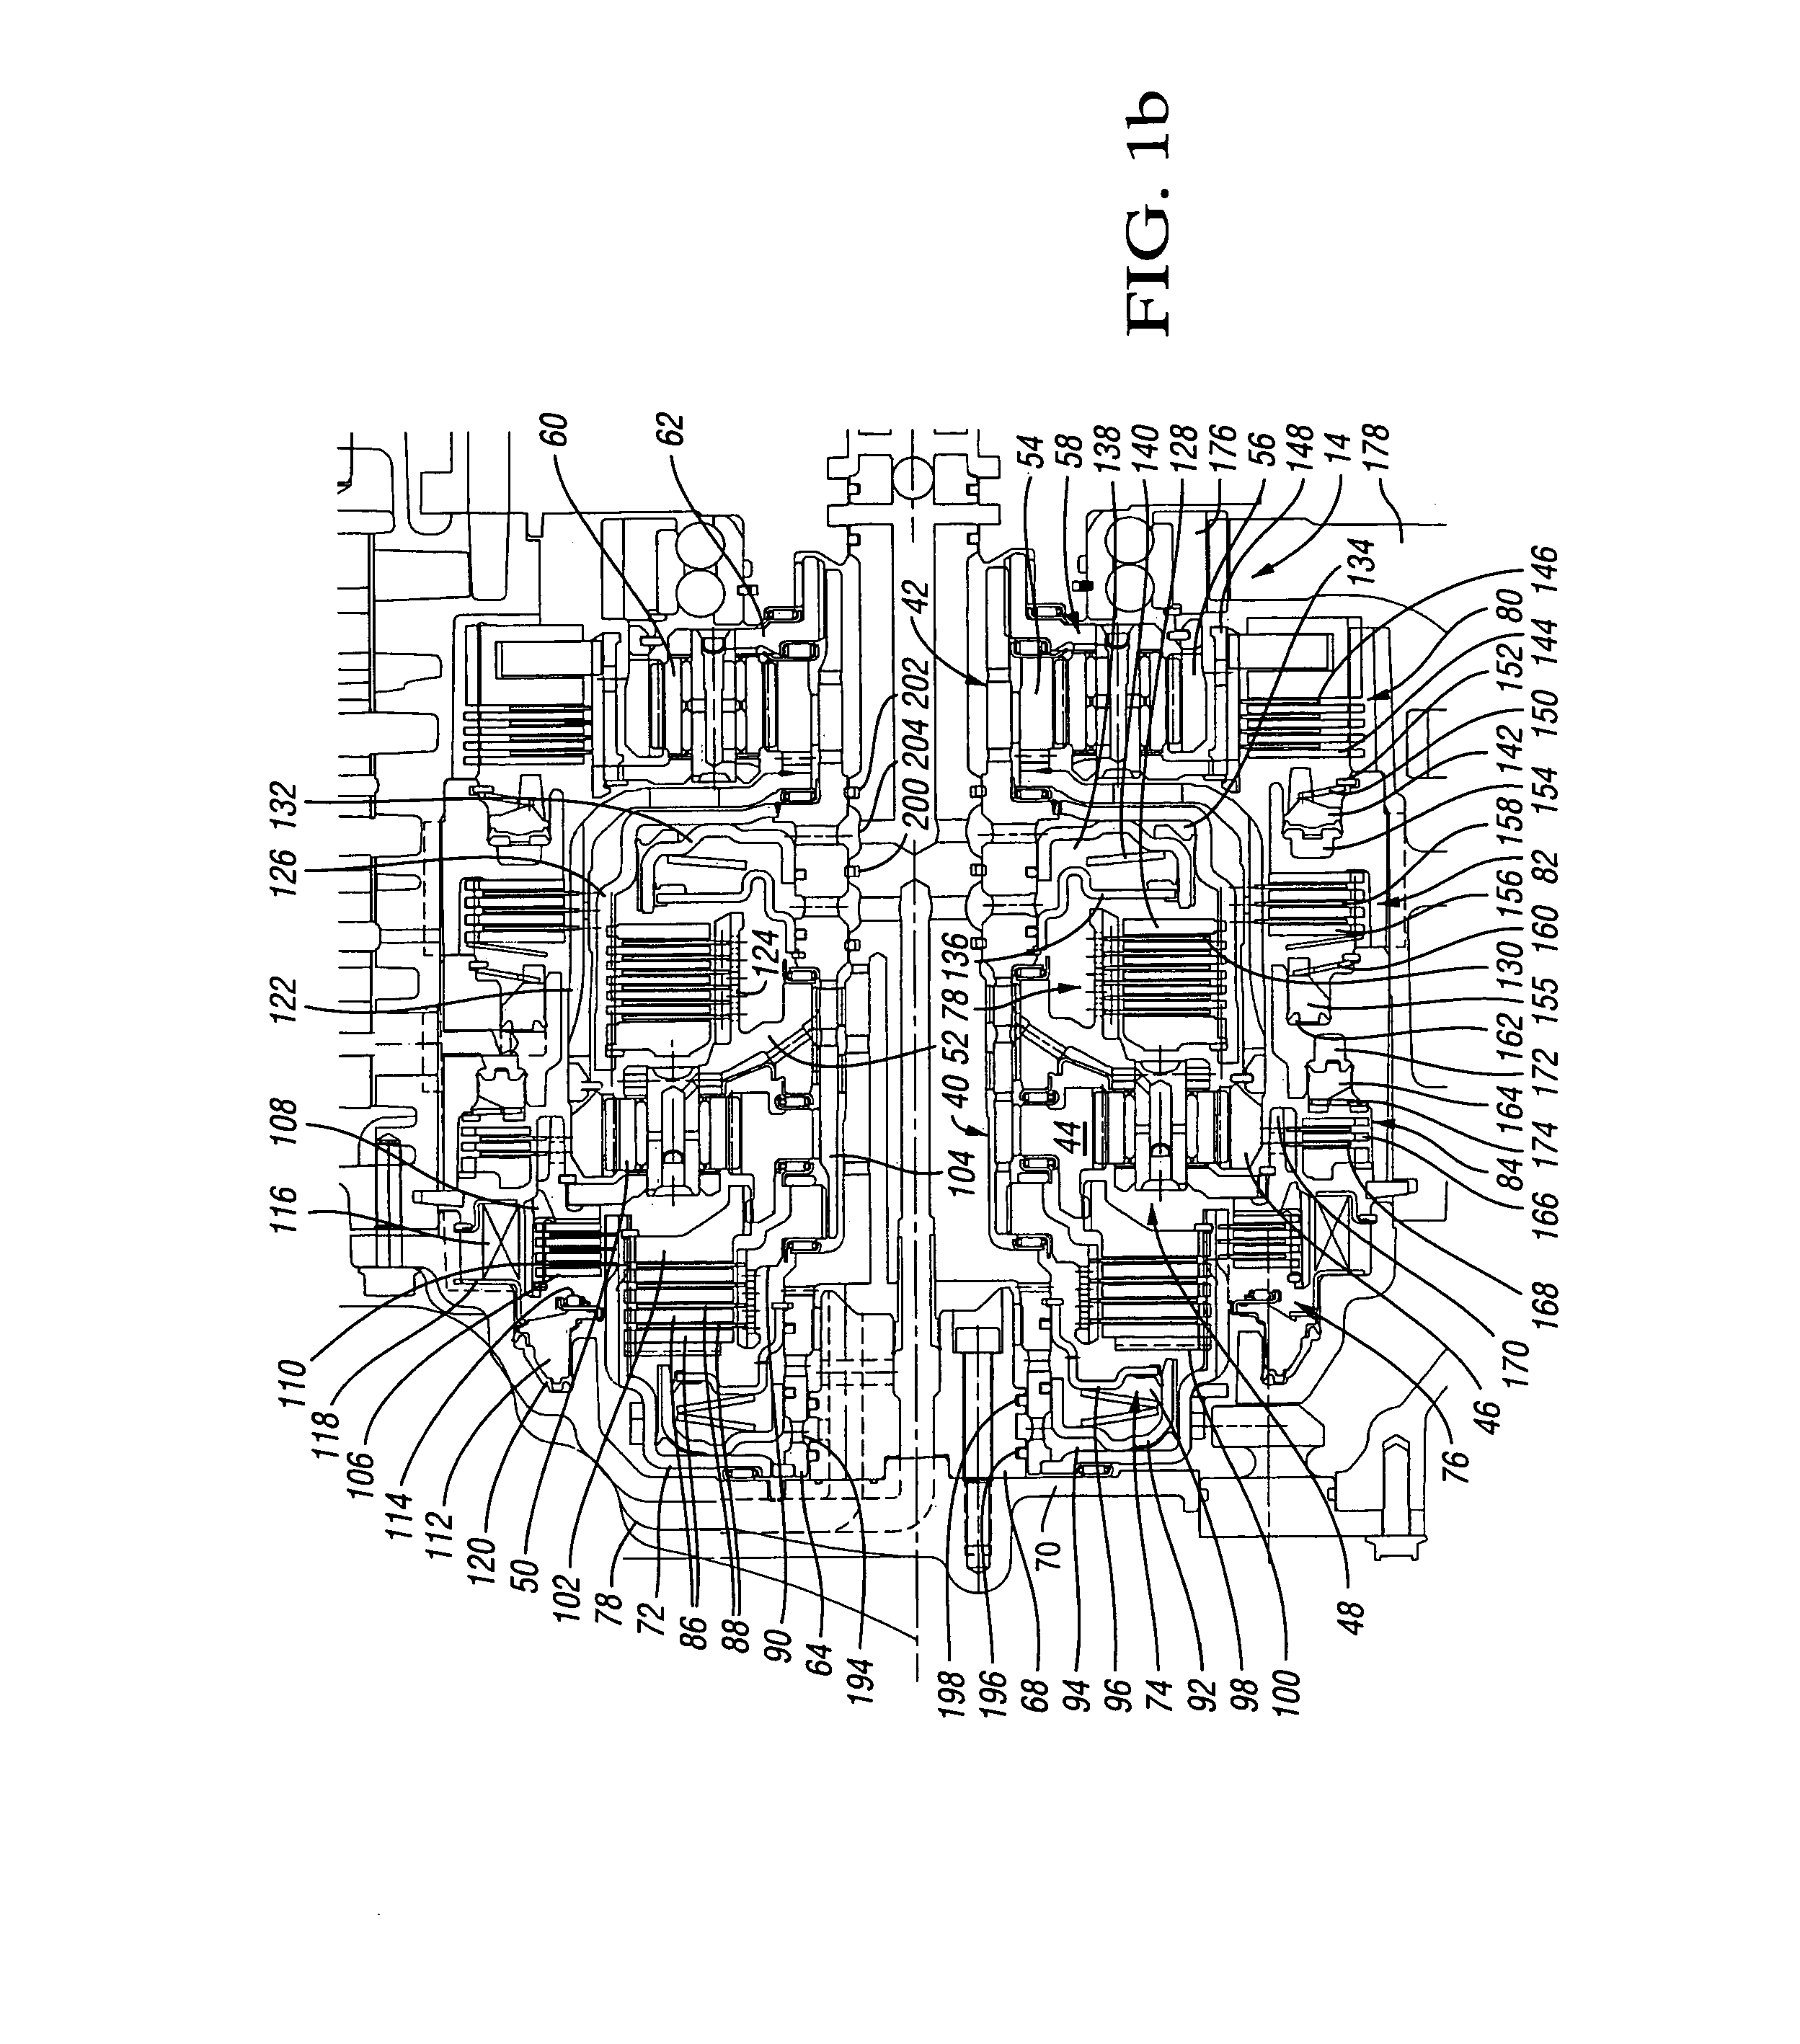 Planetary transmission having a rotating-type torque-transmitting mechanism with a stationary piston